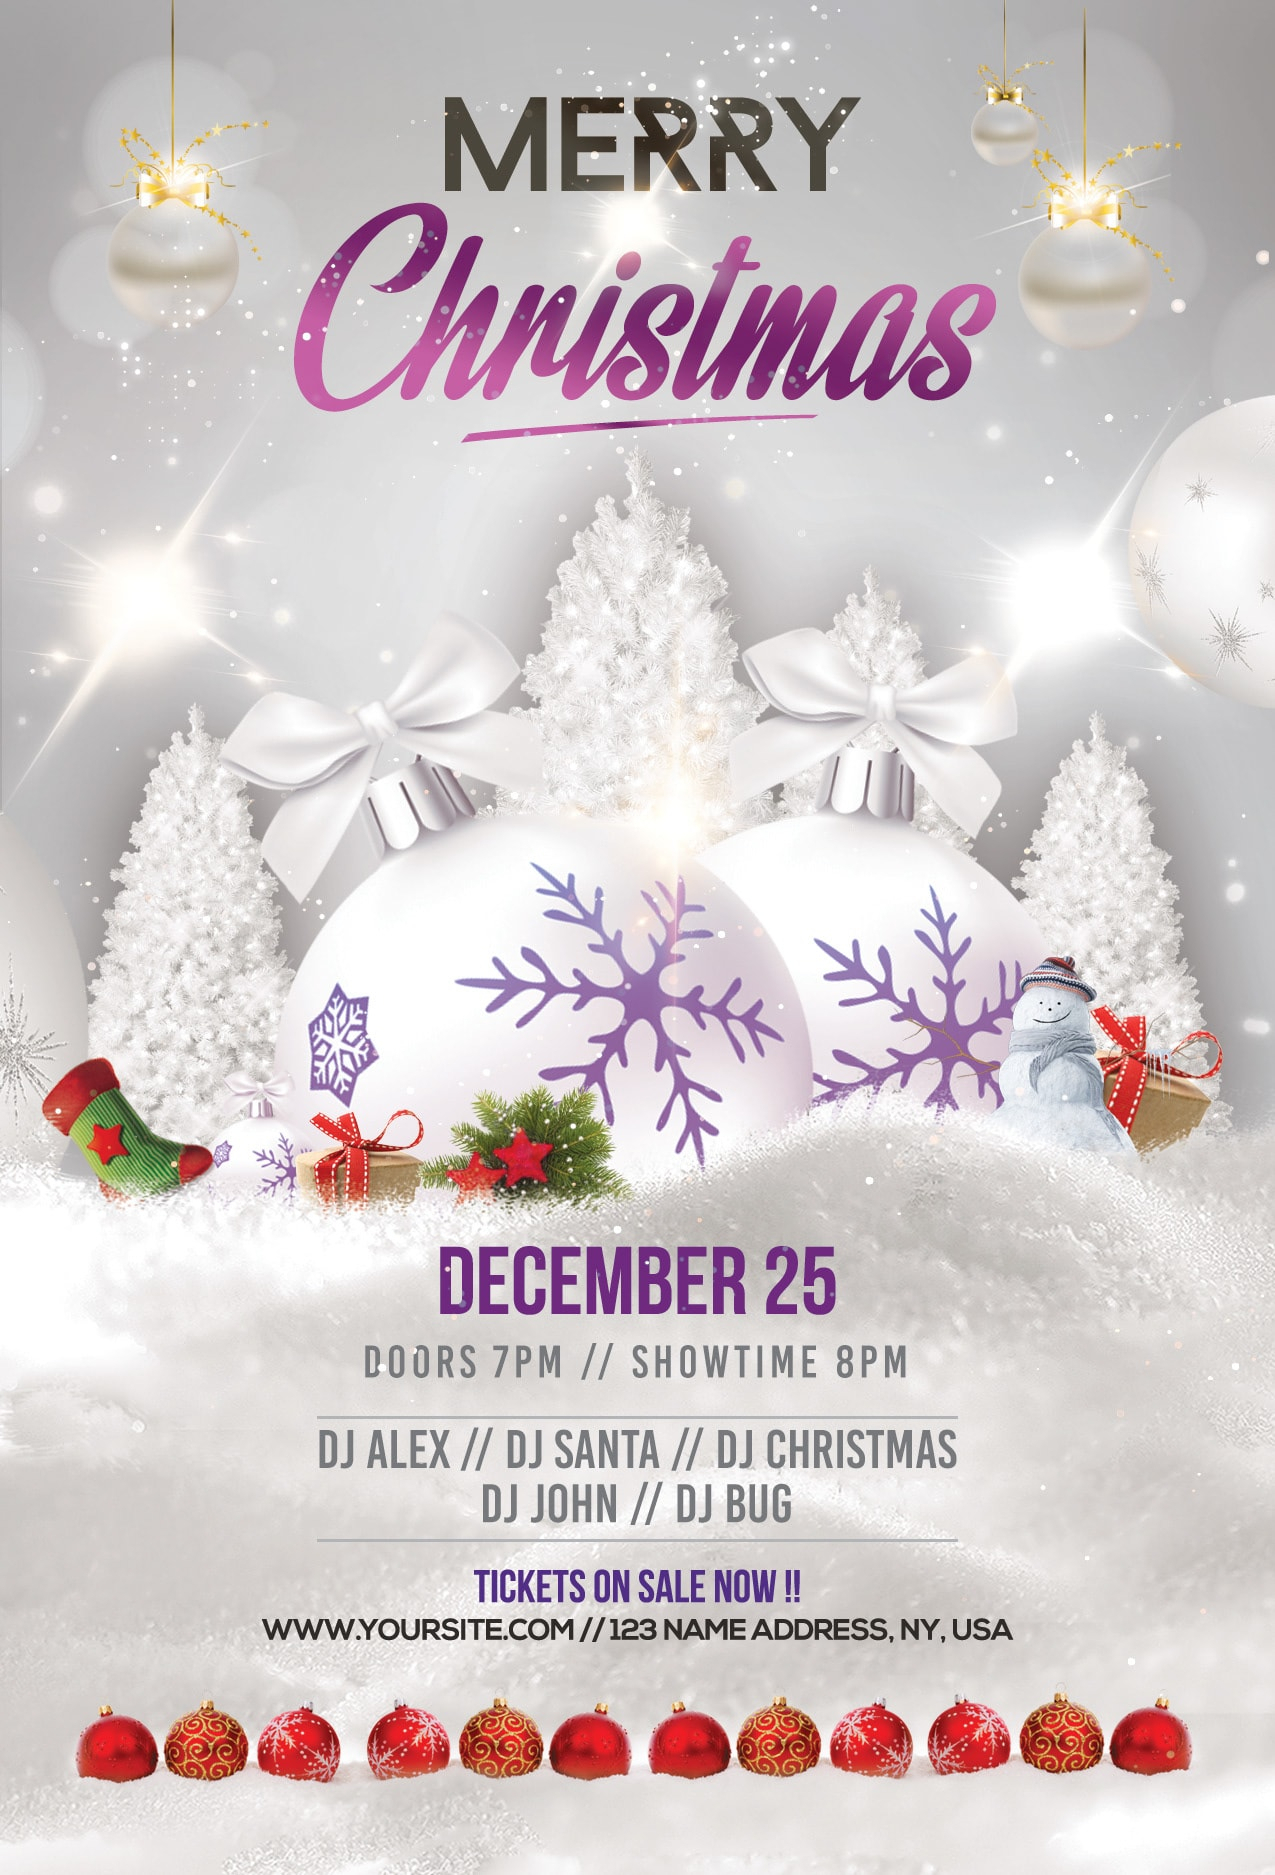 Merry Christmas & Holiday Free Psd Flyer Template - Free Psd Regarding Christmas Brochure Templates Free